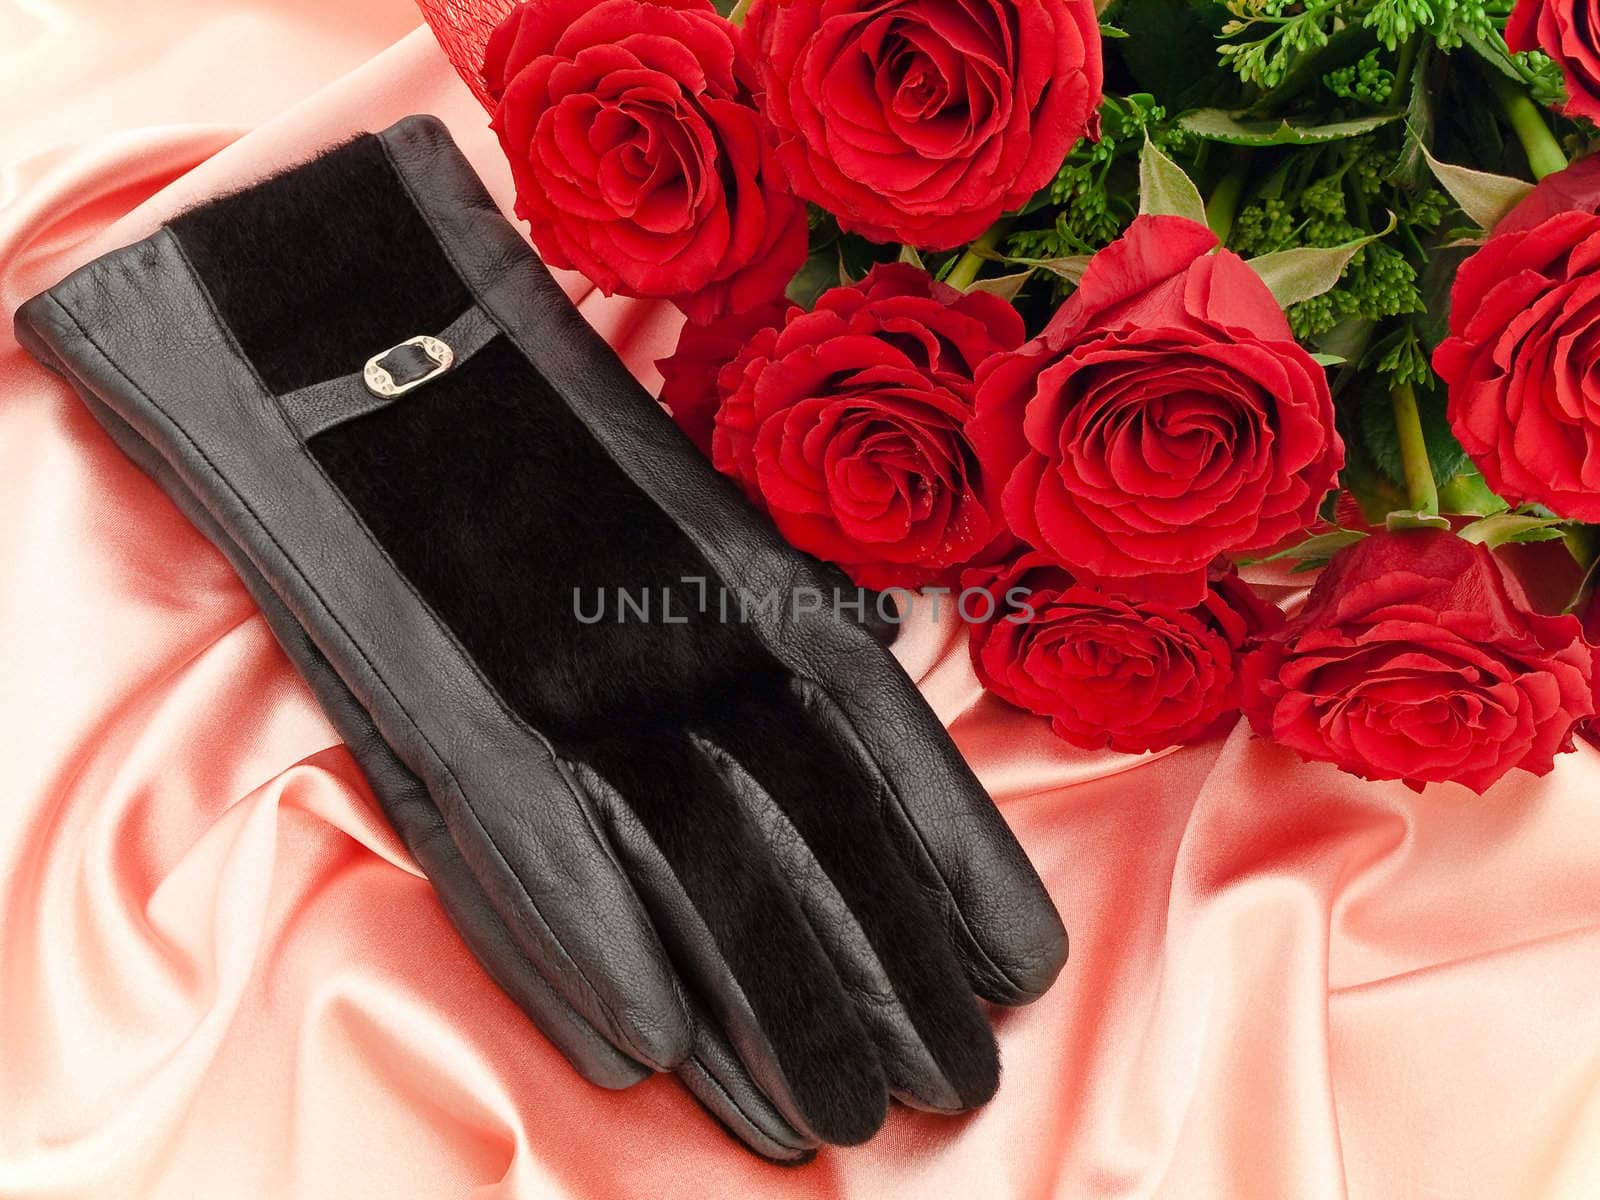 gloves near the red beautiful roses on a pink silk fabric 